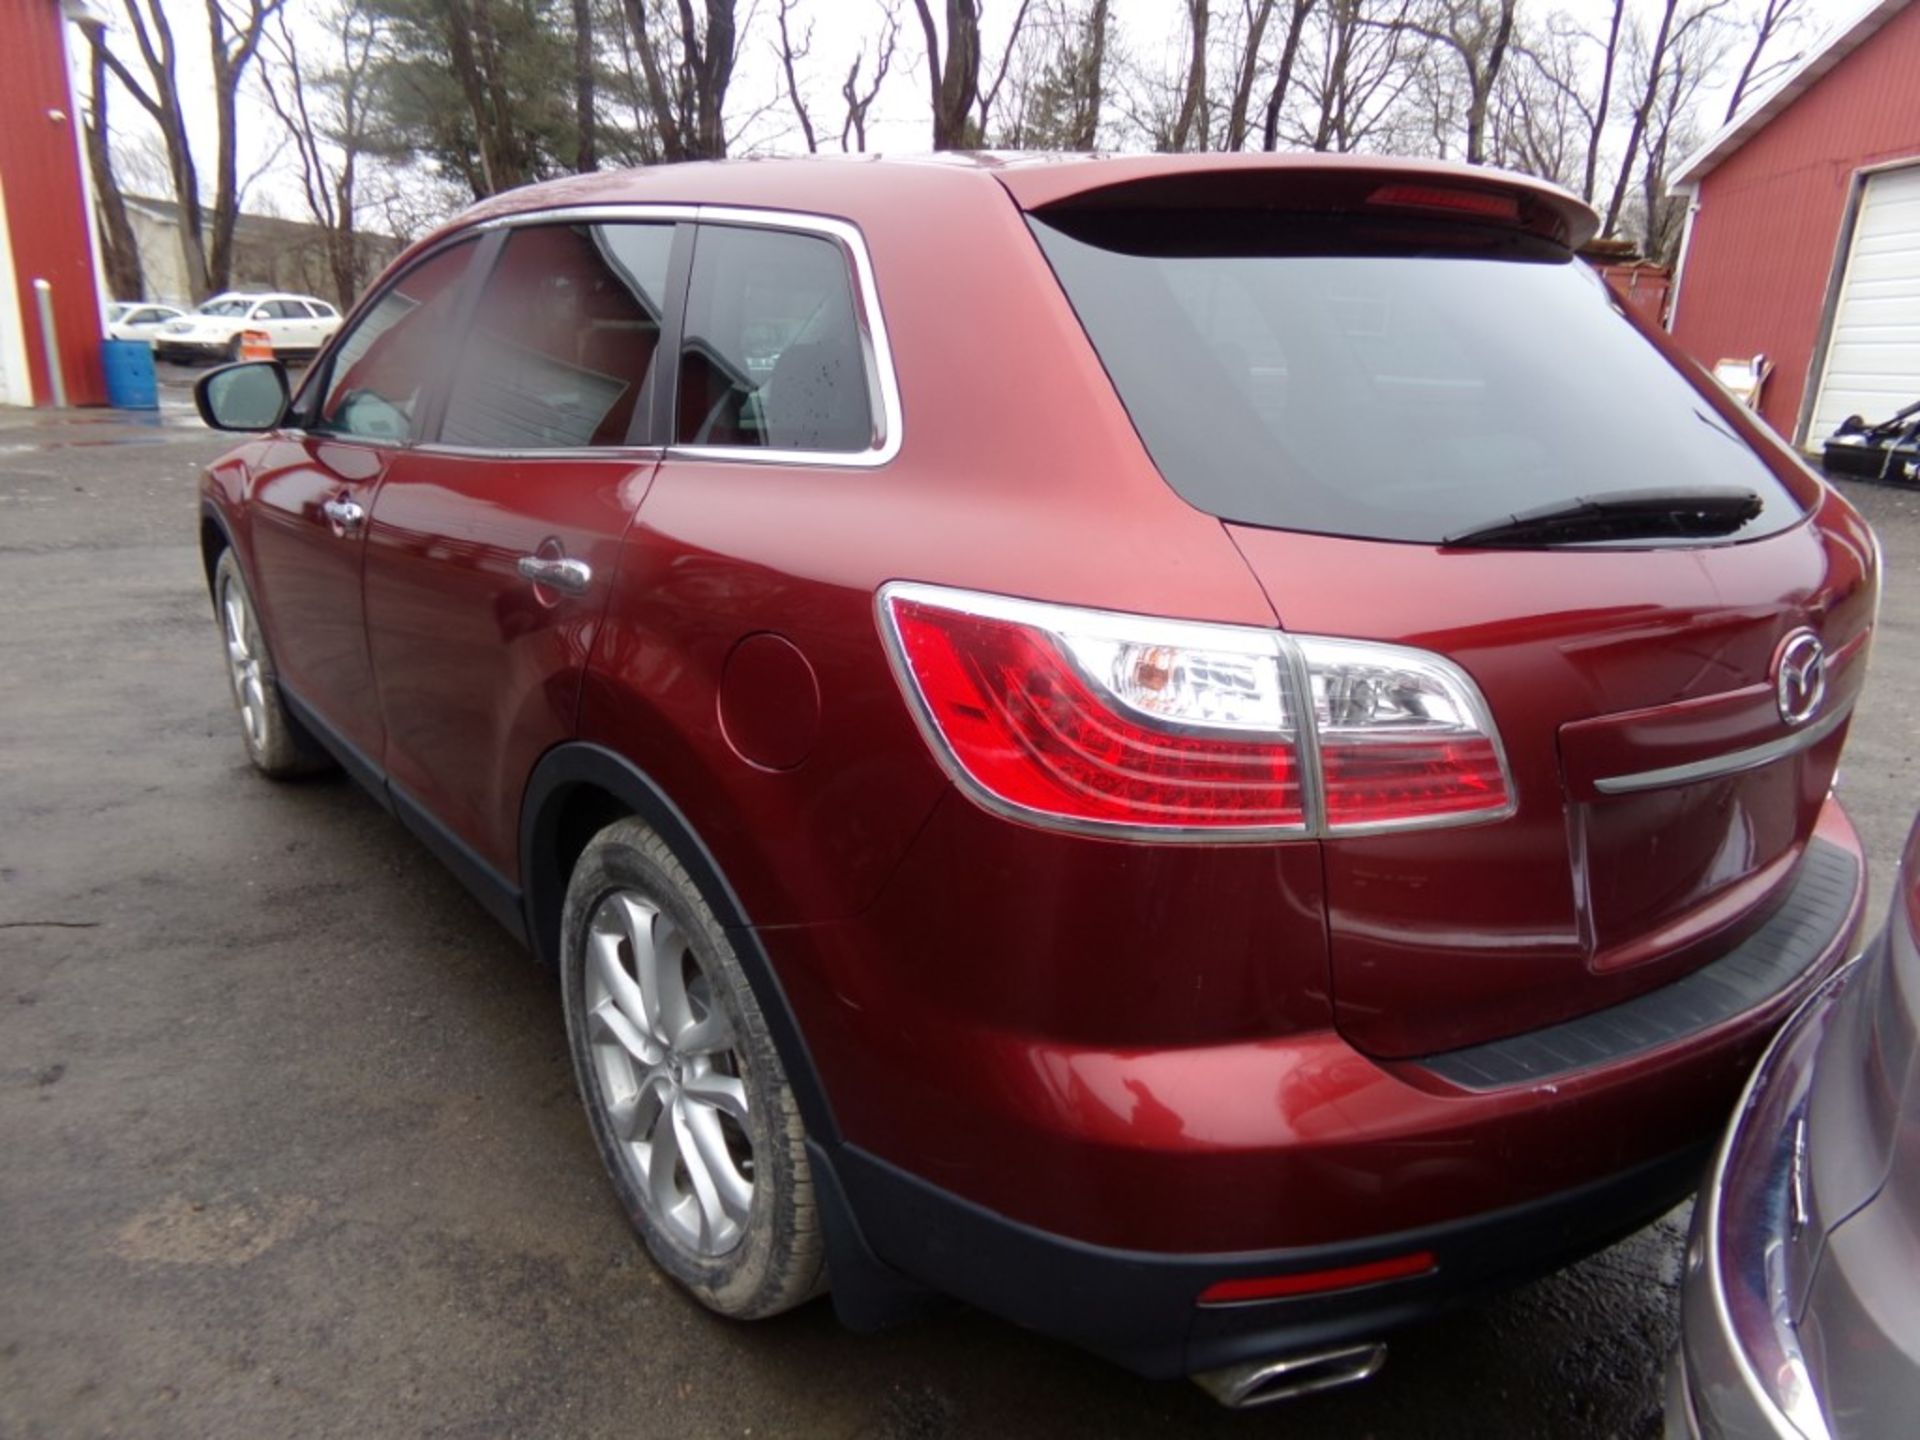 2011 Mazda CX9, AWD, Auto, Maroon, Heated Leather Seats, Sunroof, Navigation, Has New Tires, - Image 2 of 8